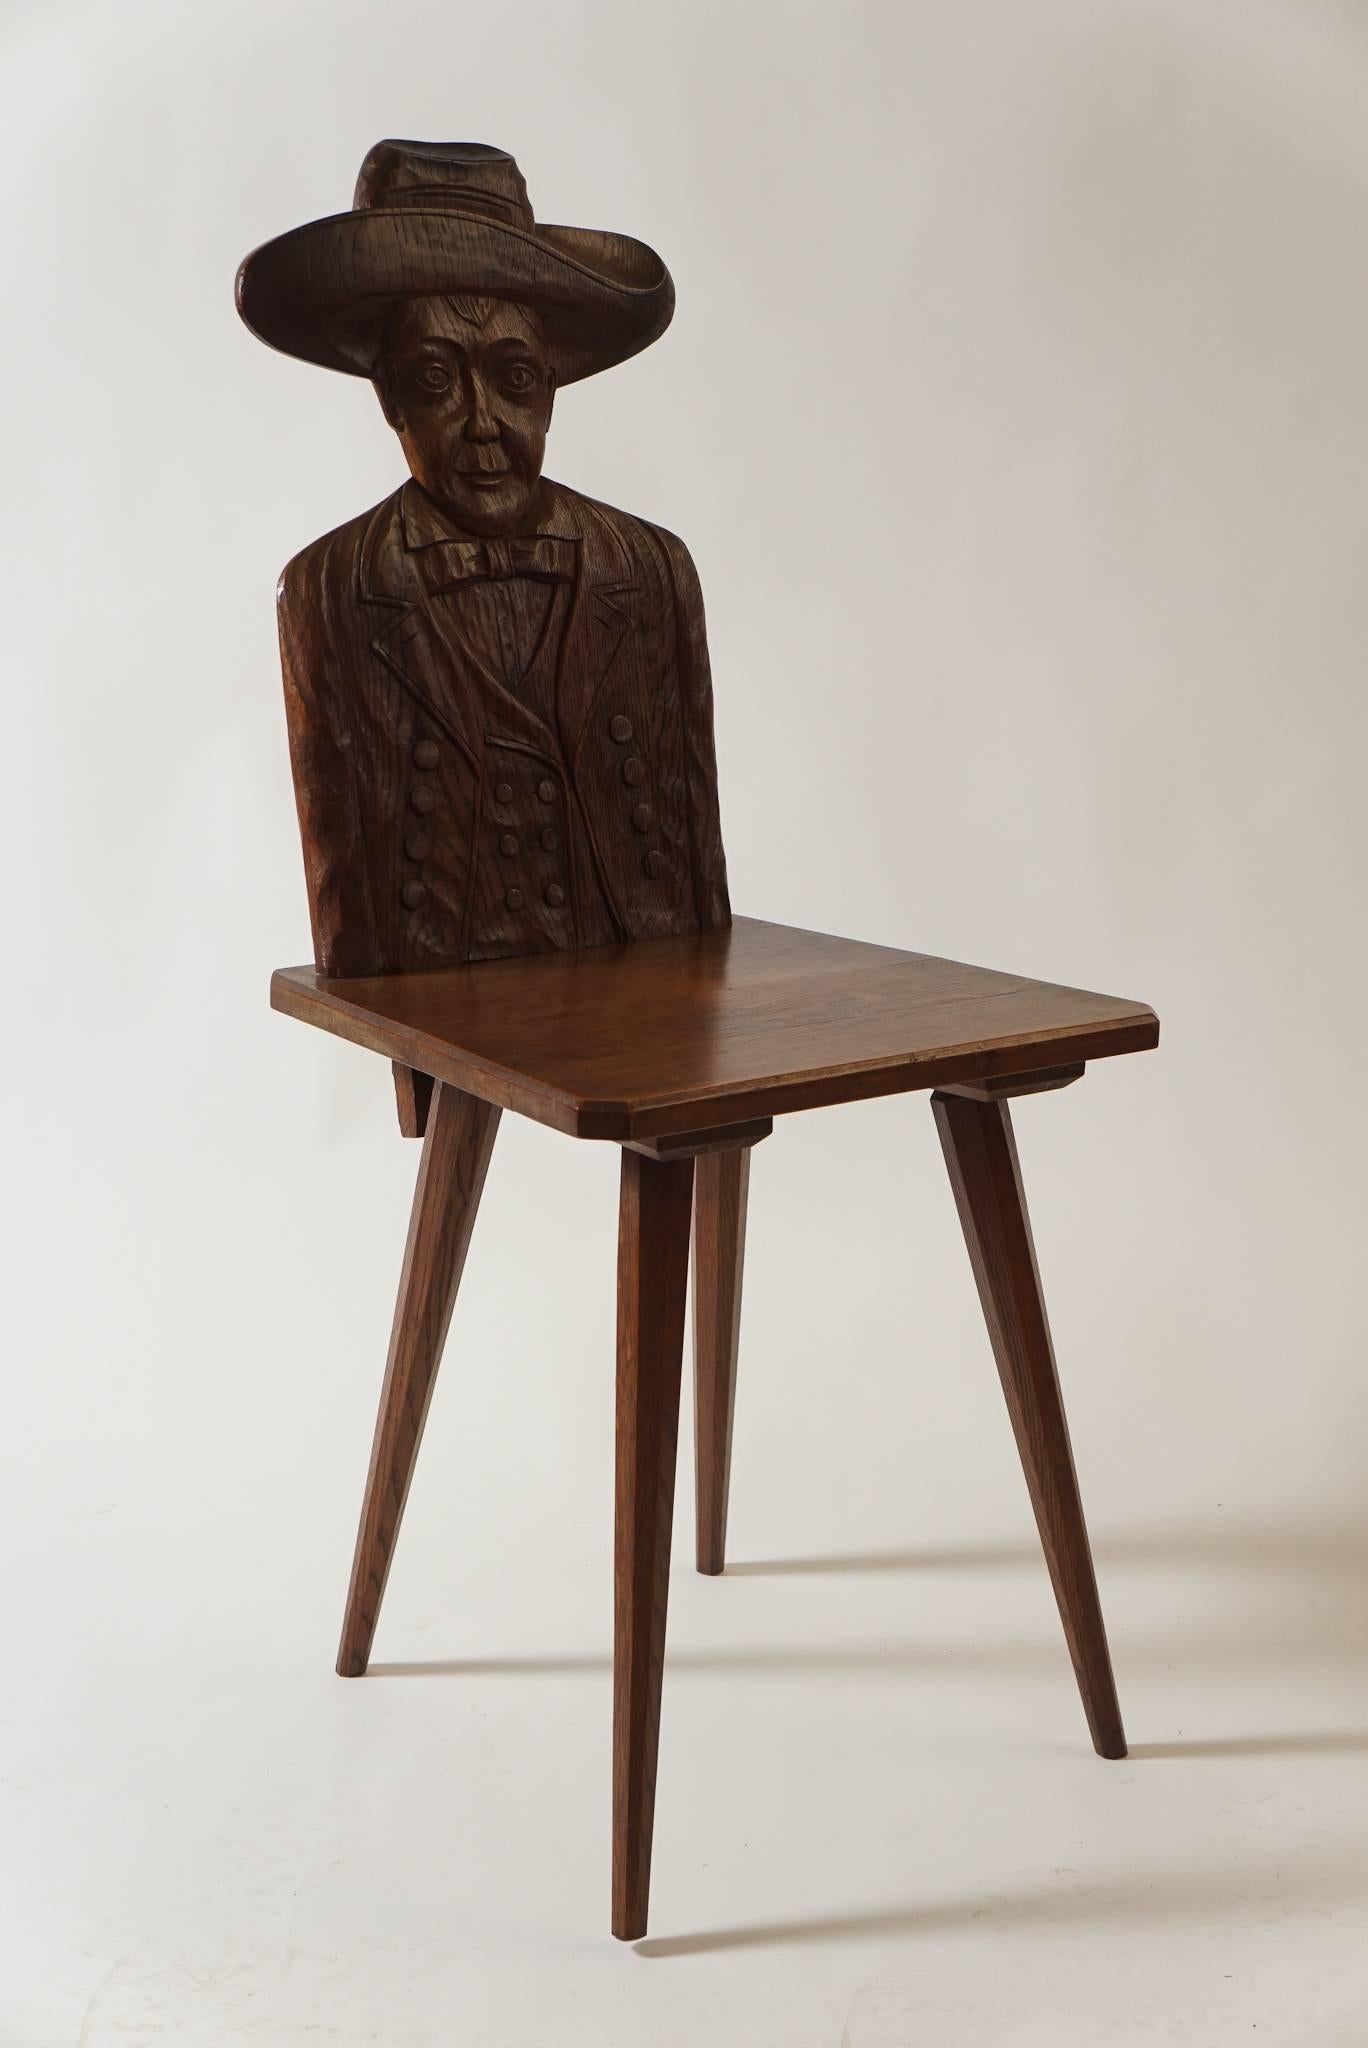 A truly wonderful and unique pair of French, circa 1920, hall seats or back stools of chestnut construction having carved full upper-body portrait backs depicting different 'Western' attired gentlemen, connecting trapezoidal shaped flat seats with